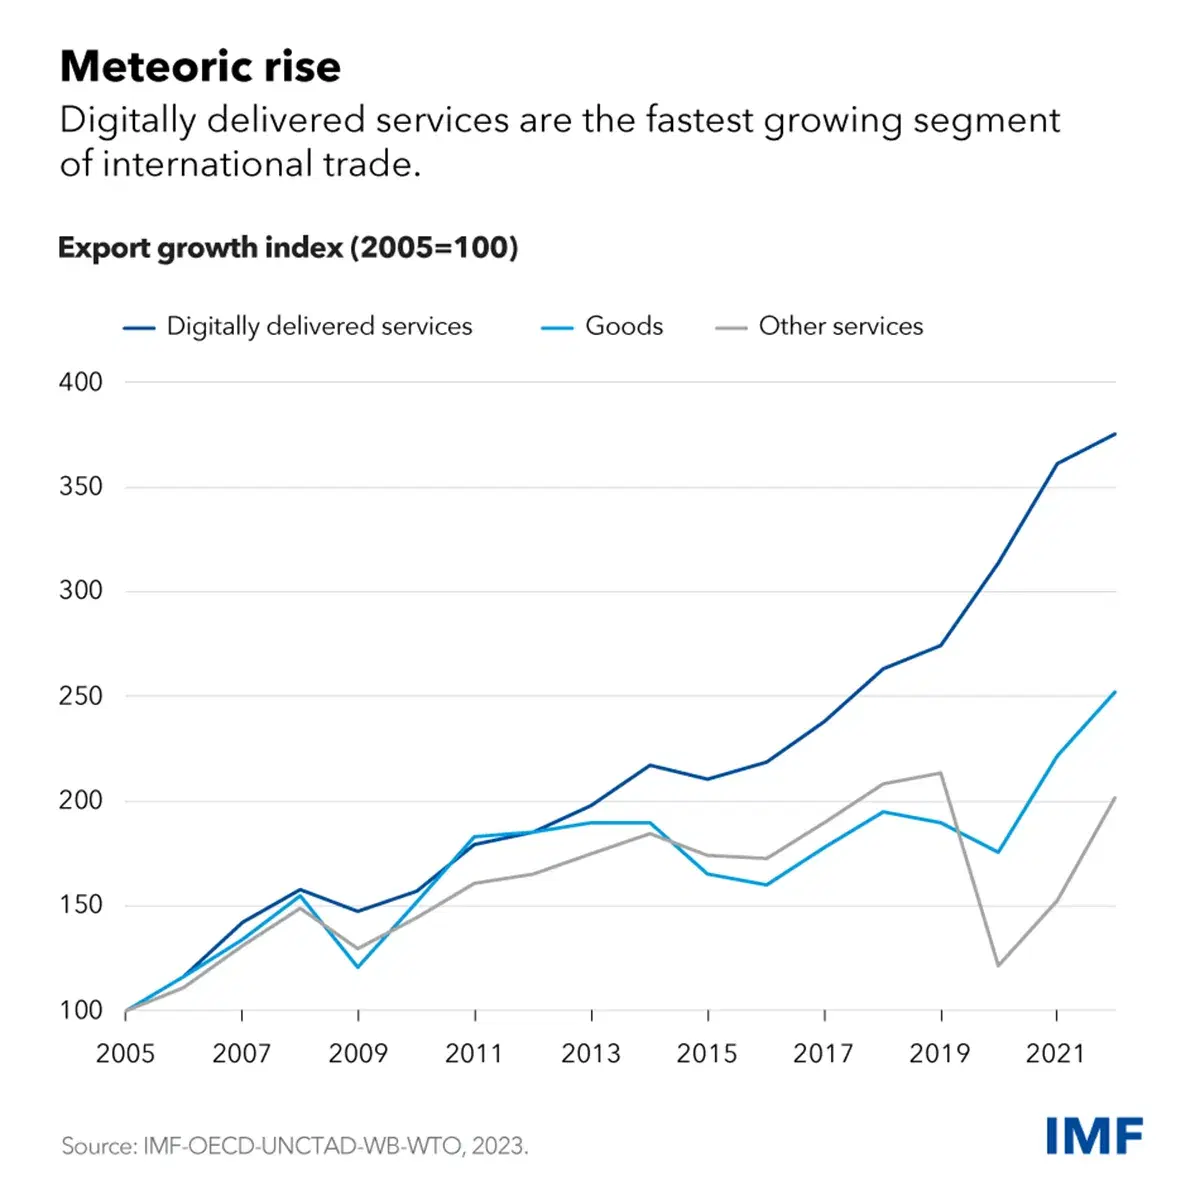 The Meteoric Rise of Digital Trade